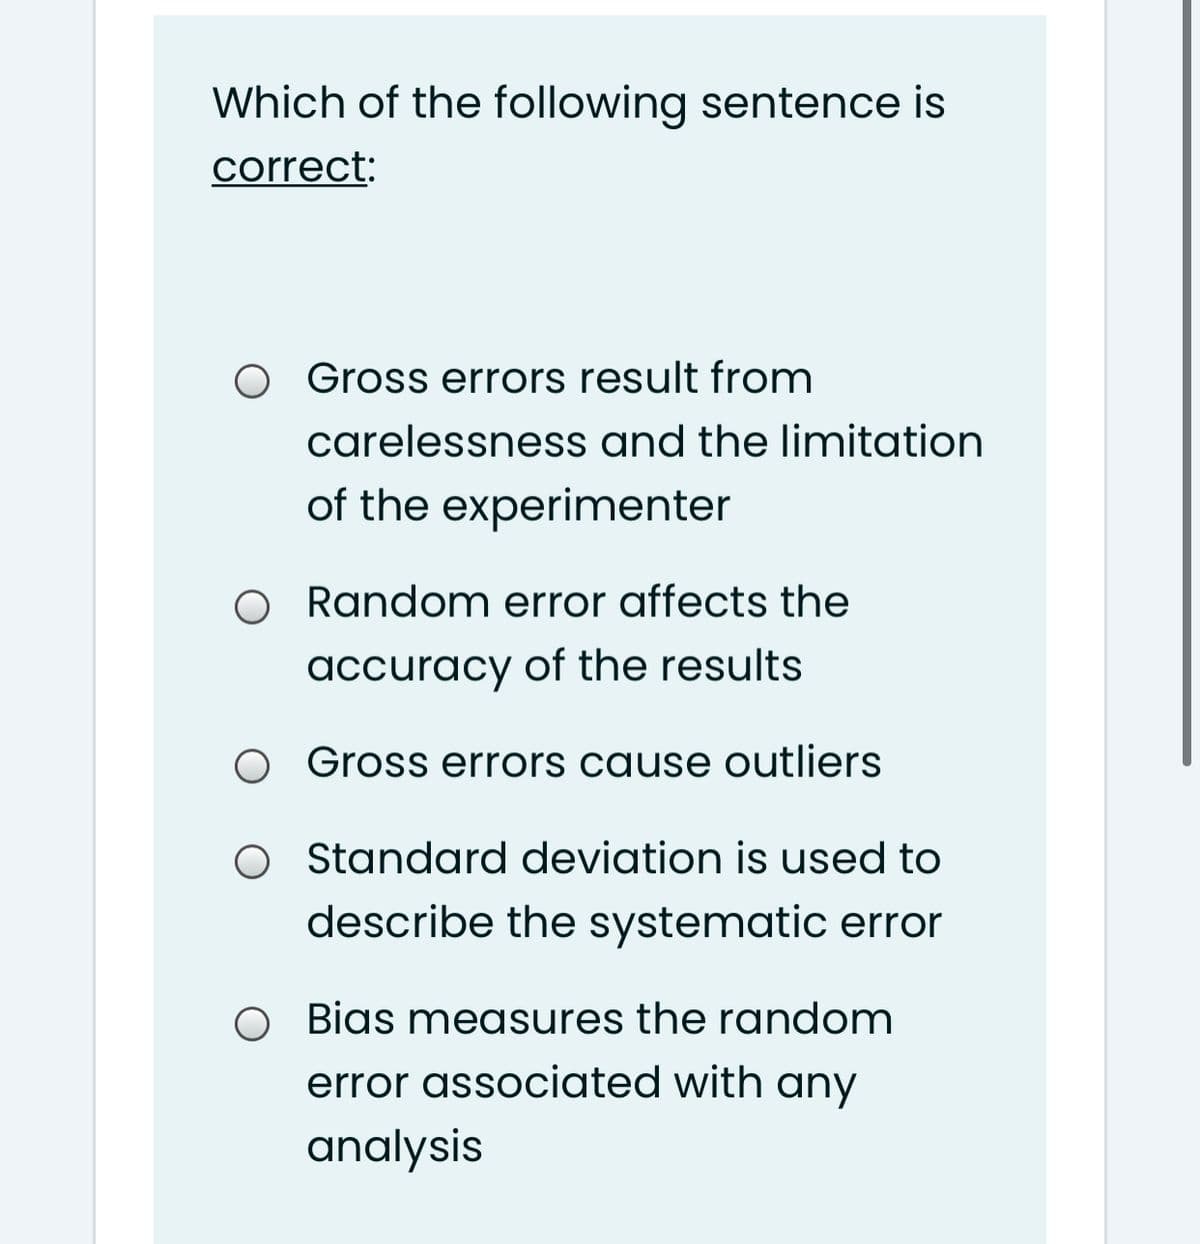 Which of the following sentence is
correct:
O Gross errors result from
carelessness and the limitation
of the experimenter
O Random error affects the
accuracy of the results
Gross errors cause outliers
O tandard deviation is used to
describe the systematic error
O Bias measures the random
error associated with any
analysis
